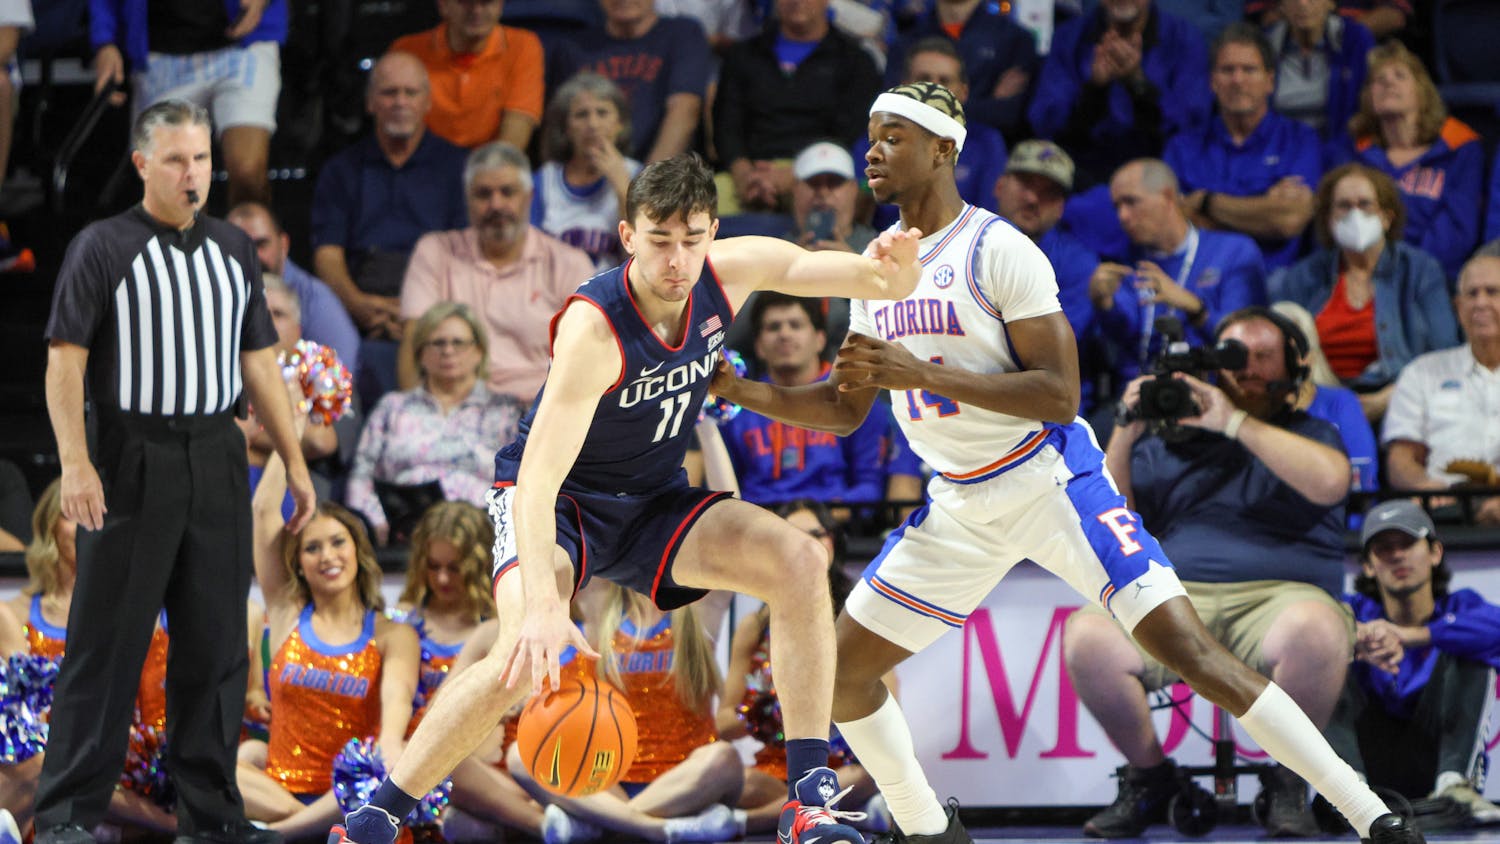 Florida guard Kowacie Reeves plays defense against a Connecticut player in the Gators’ 75-54 loss to the Huskies Wednesday, Dec. 7, 2022.